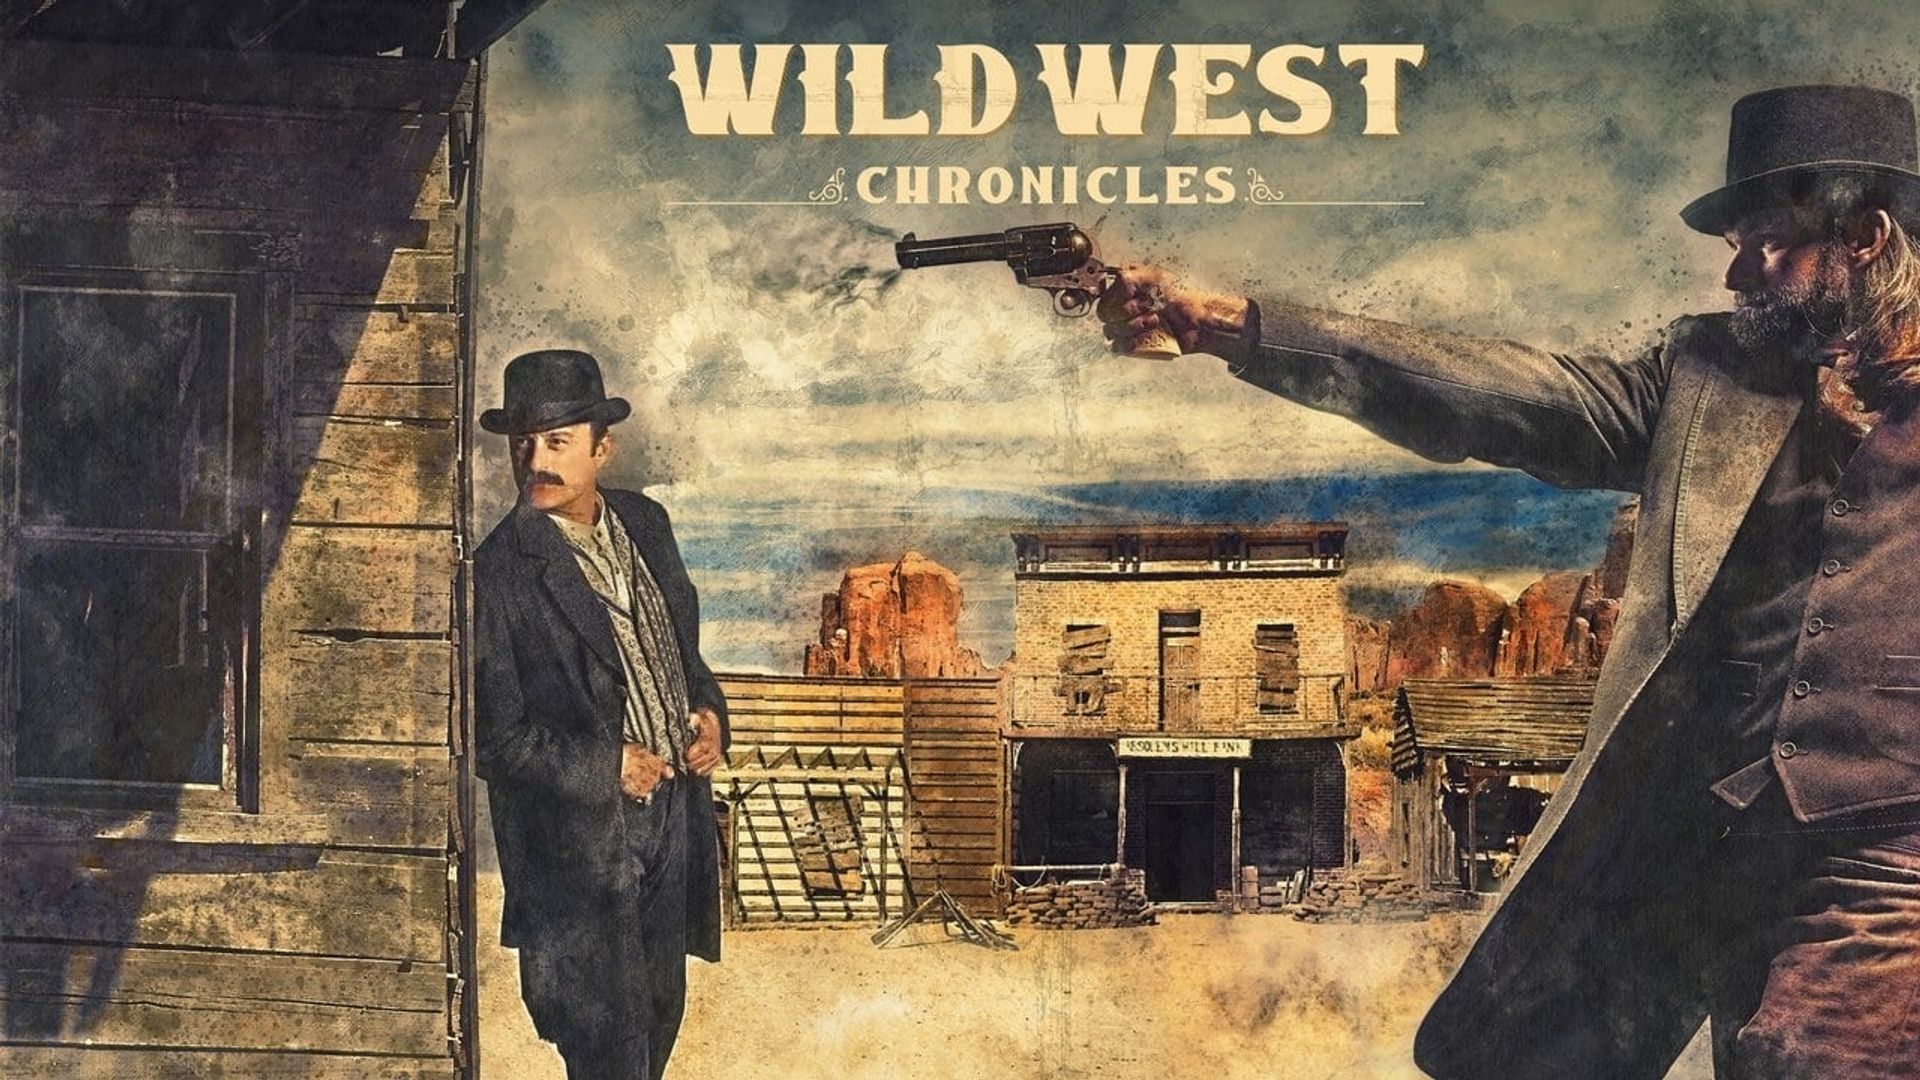 Wild West Chronicles background